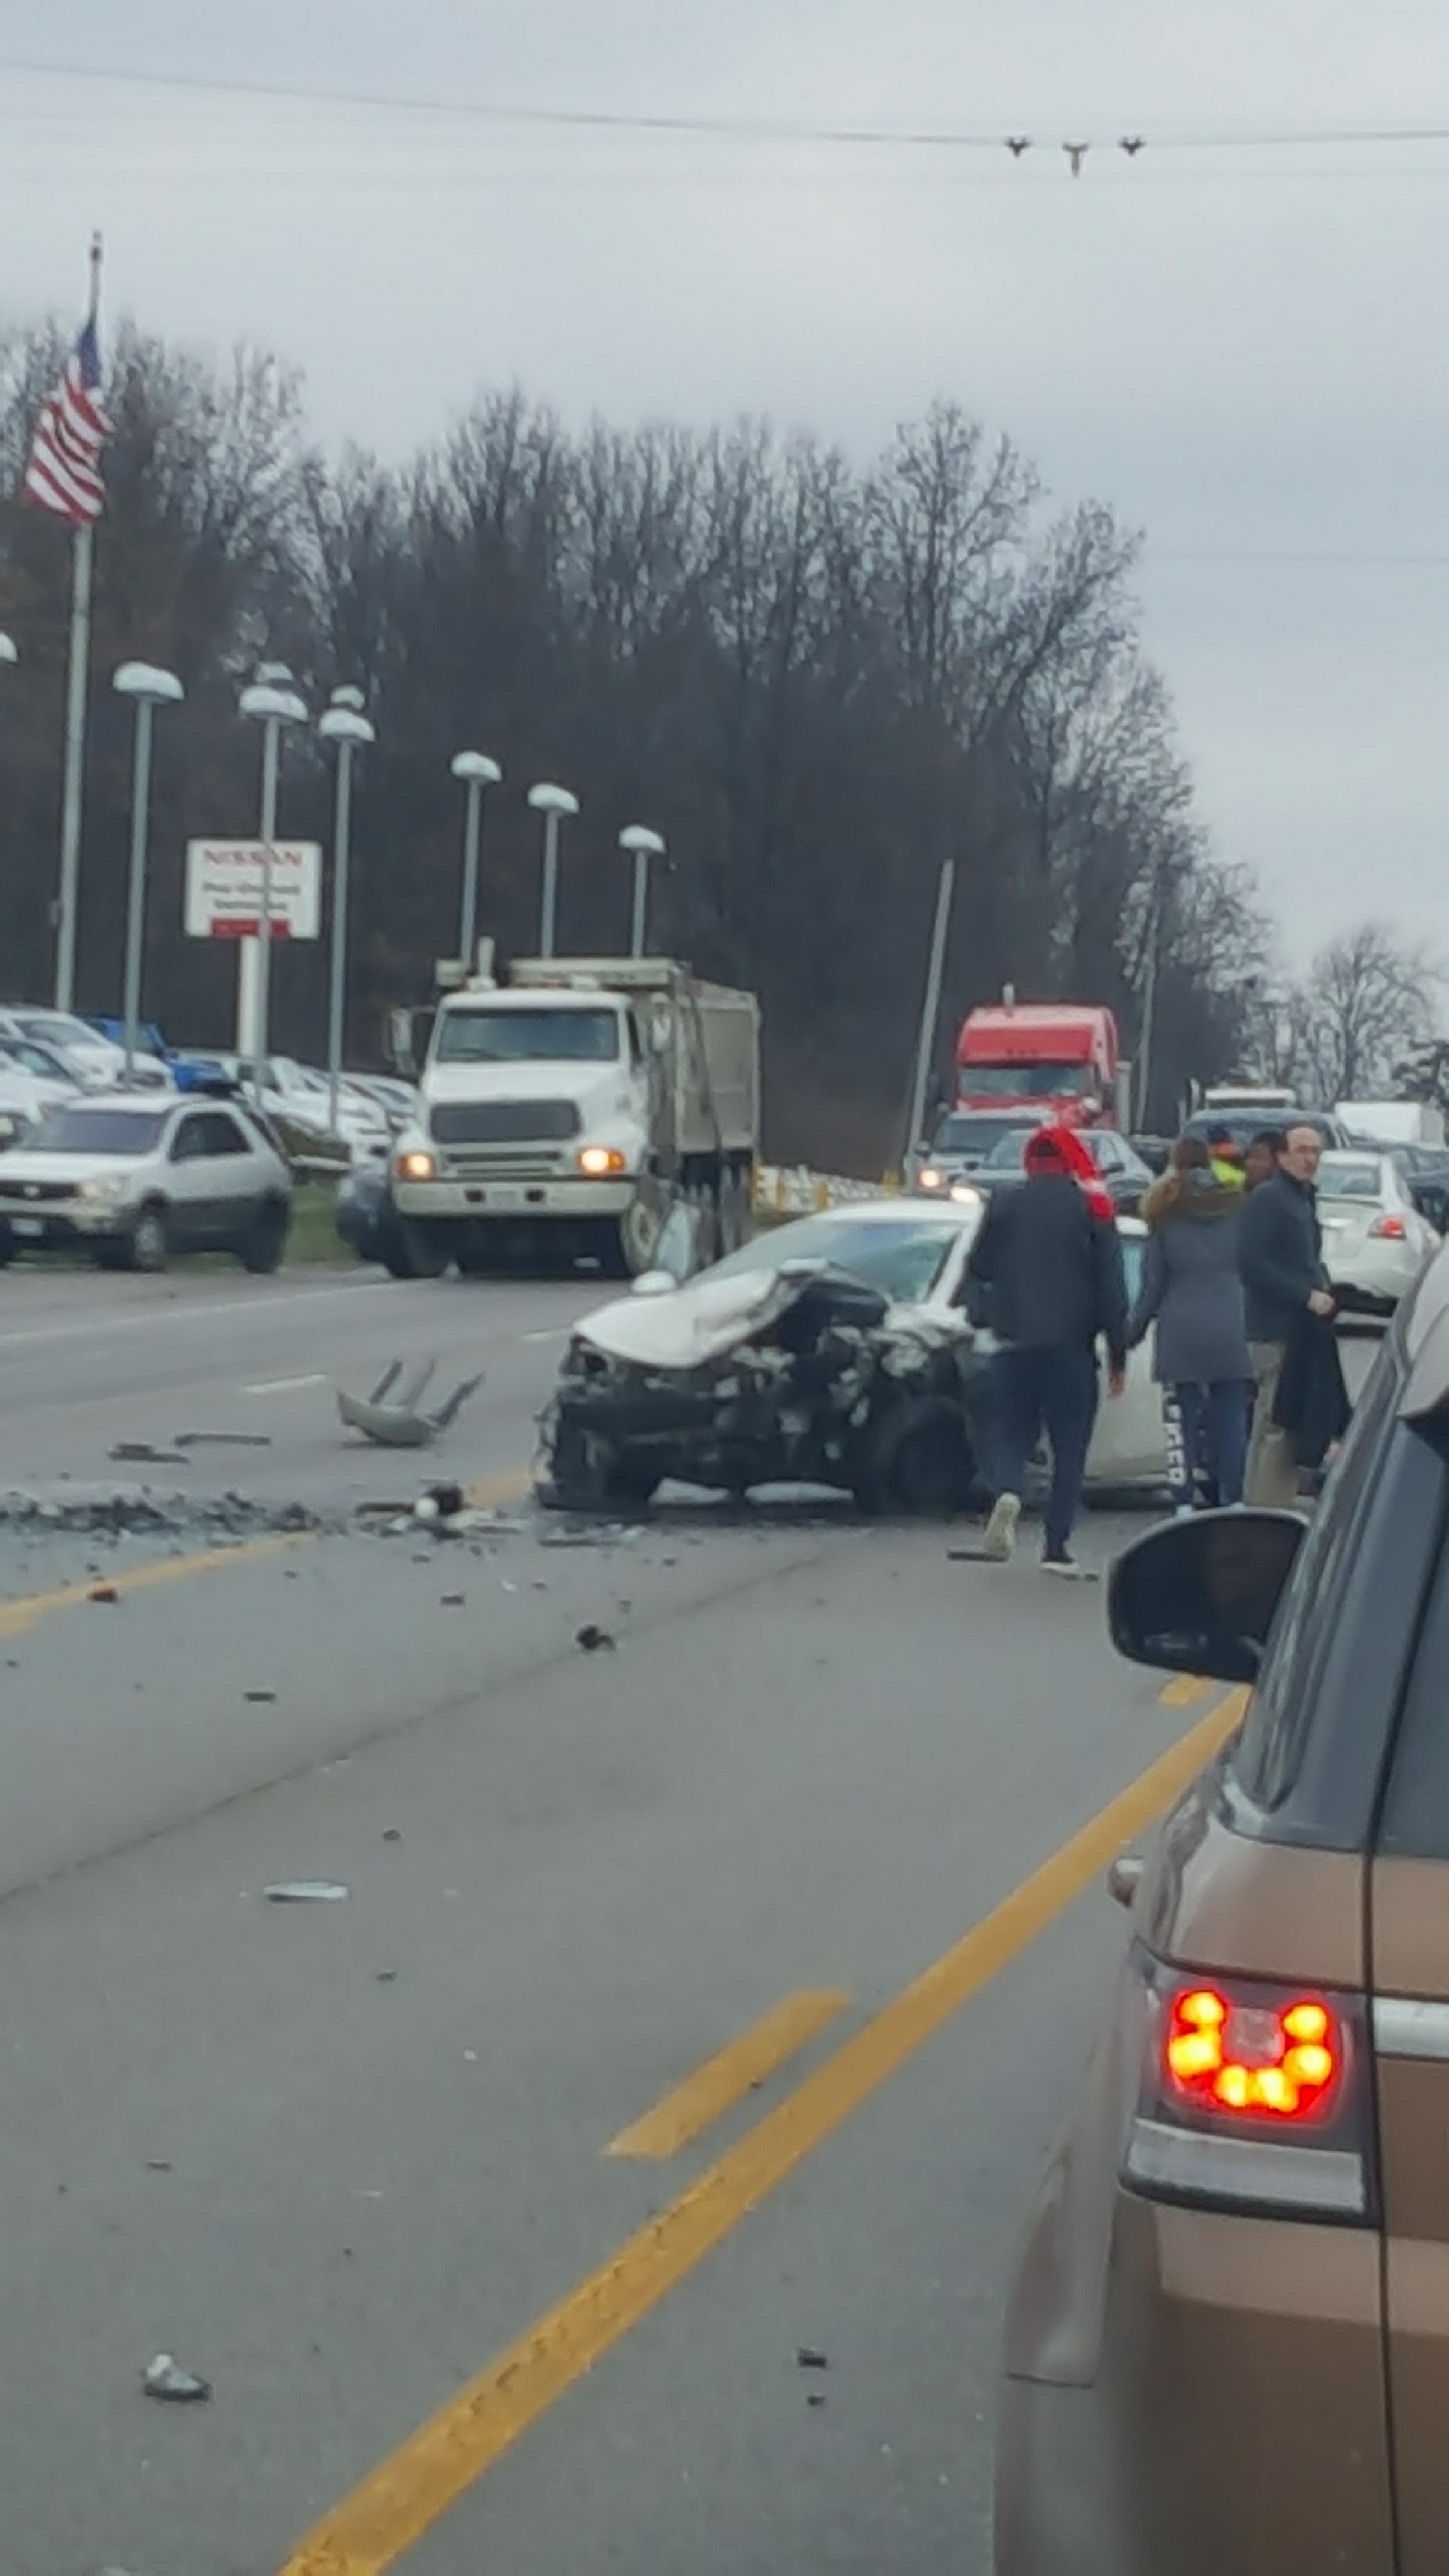 Two fatalities identified, several others injured in US23 crash in